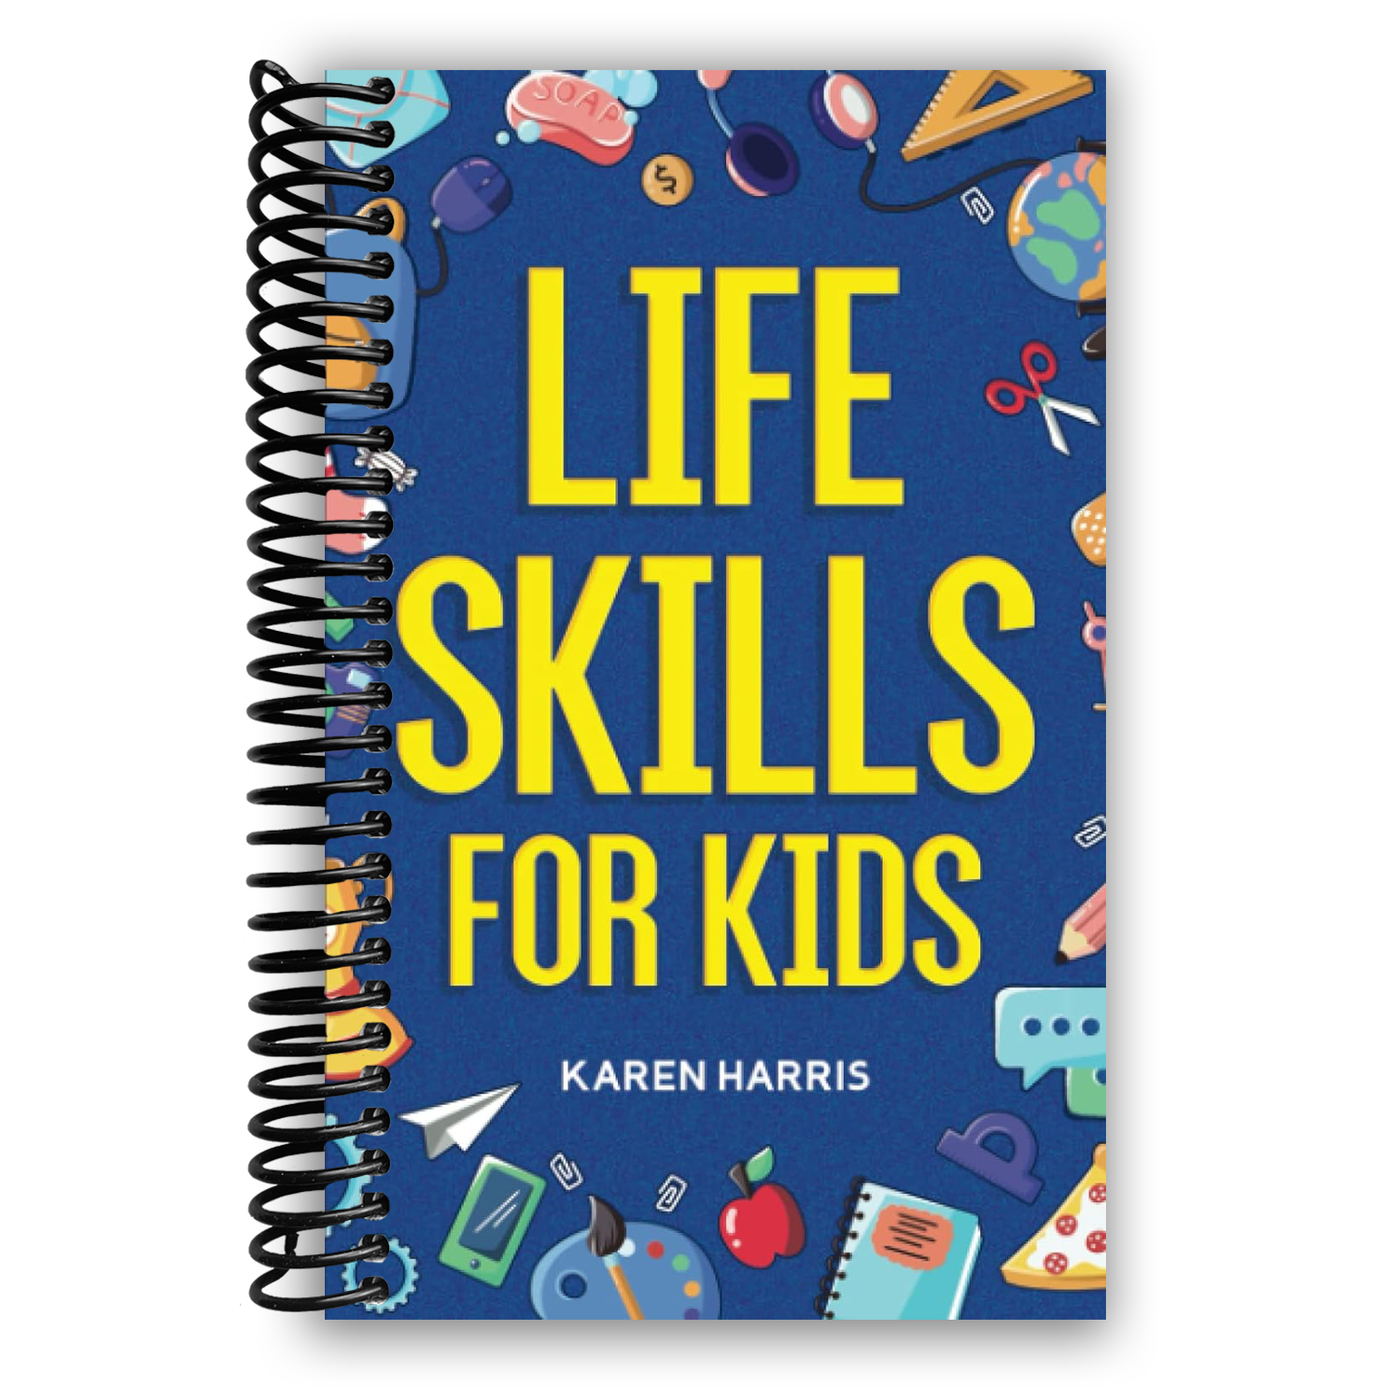 Life skills for kids spiral bound â lay it flat publishing group